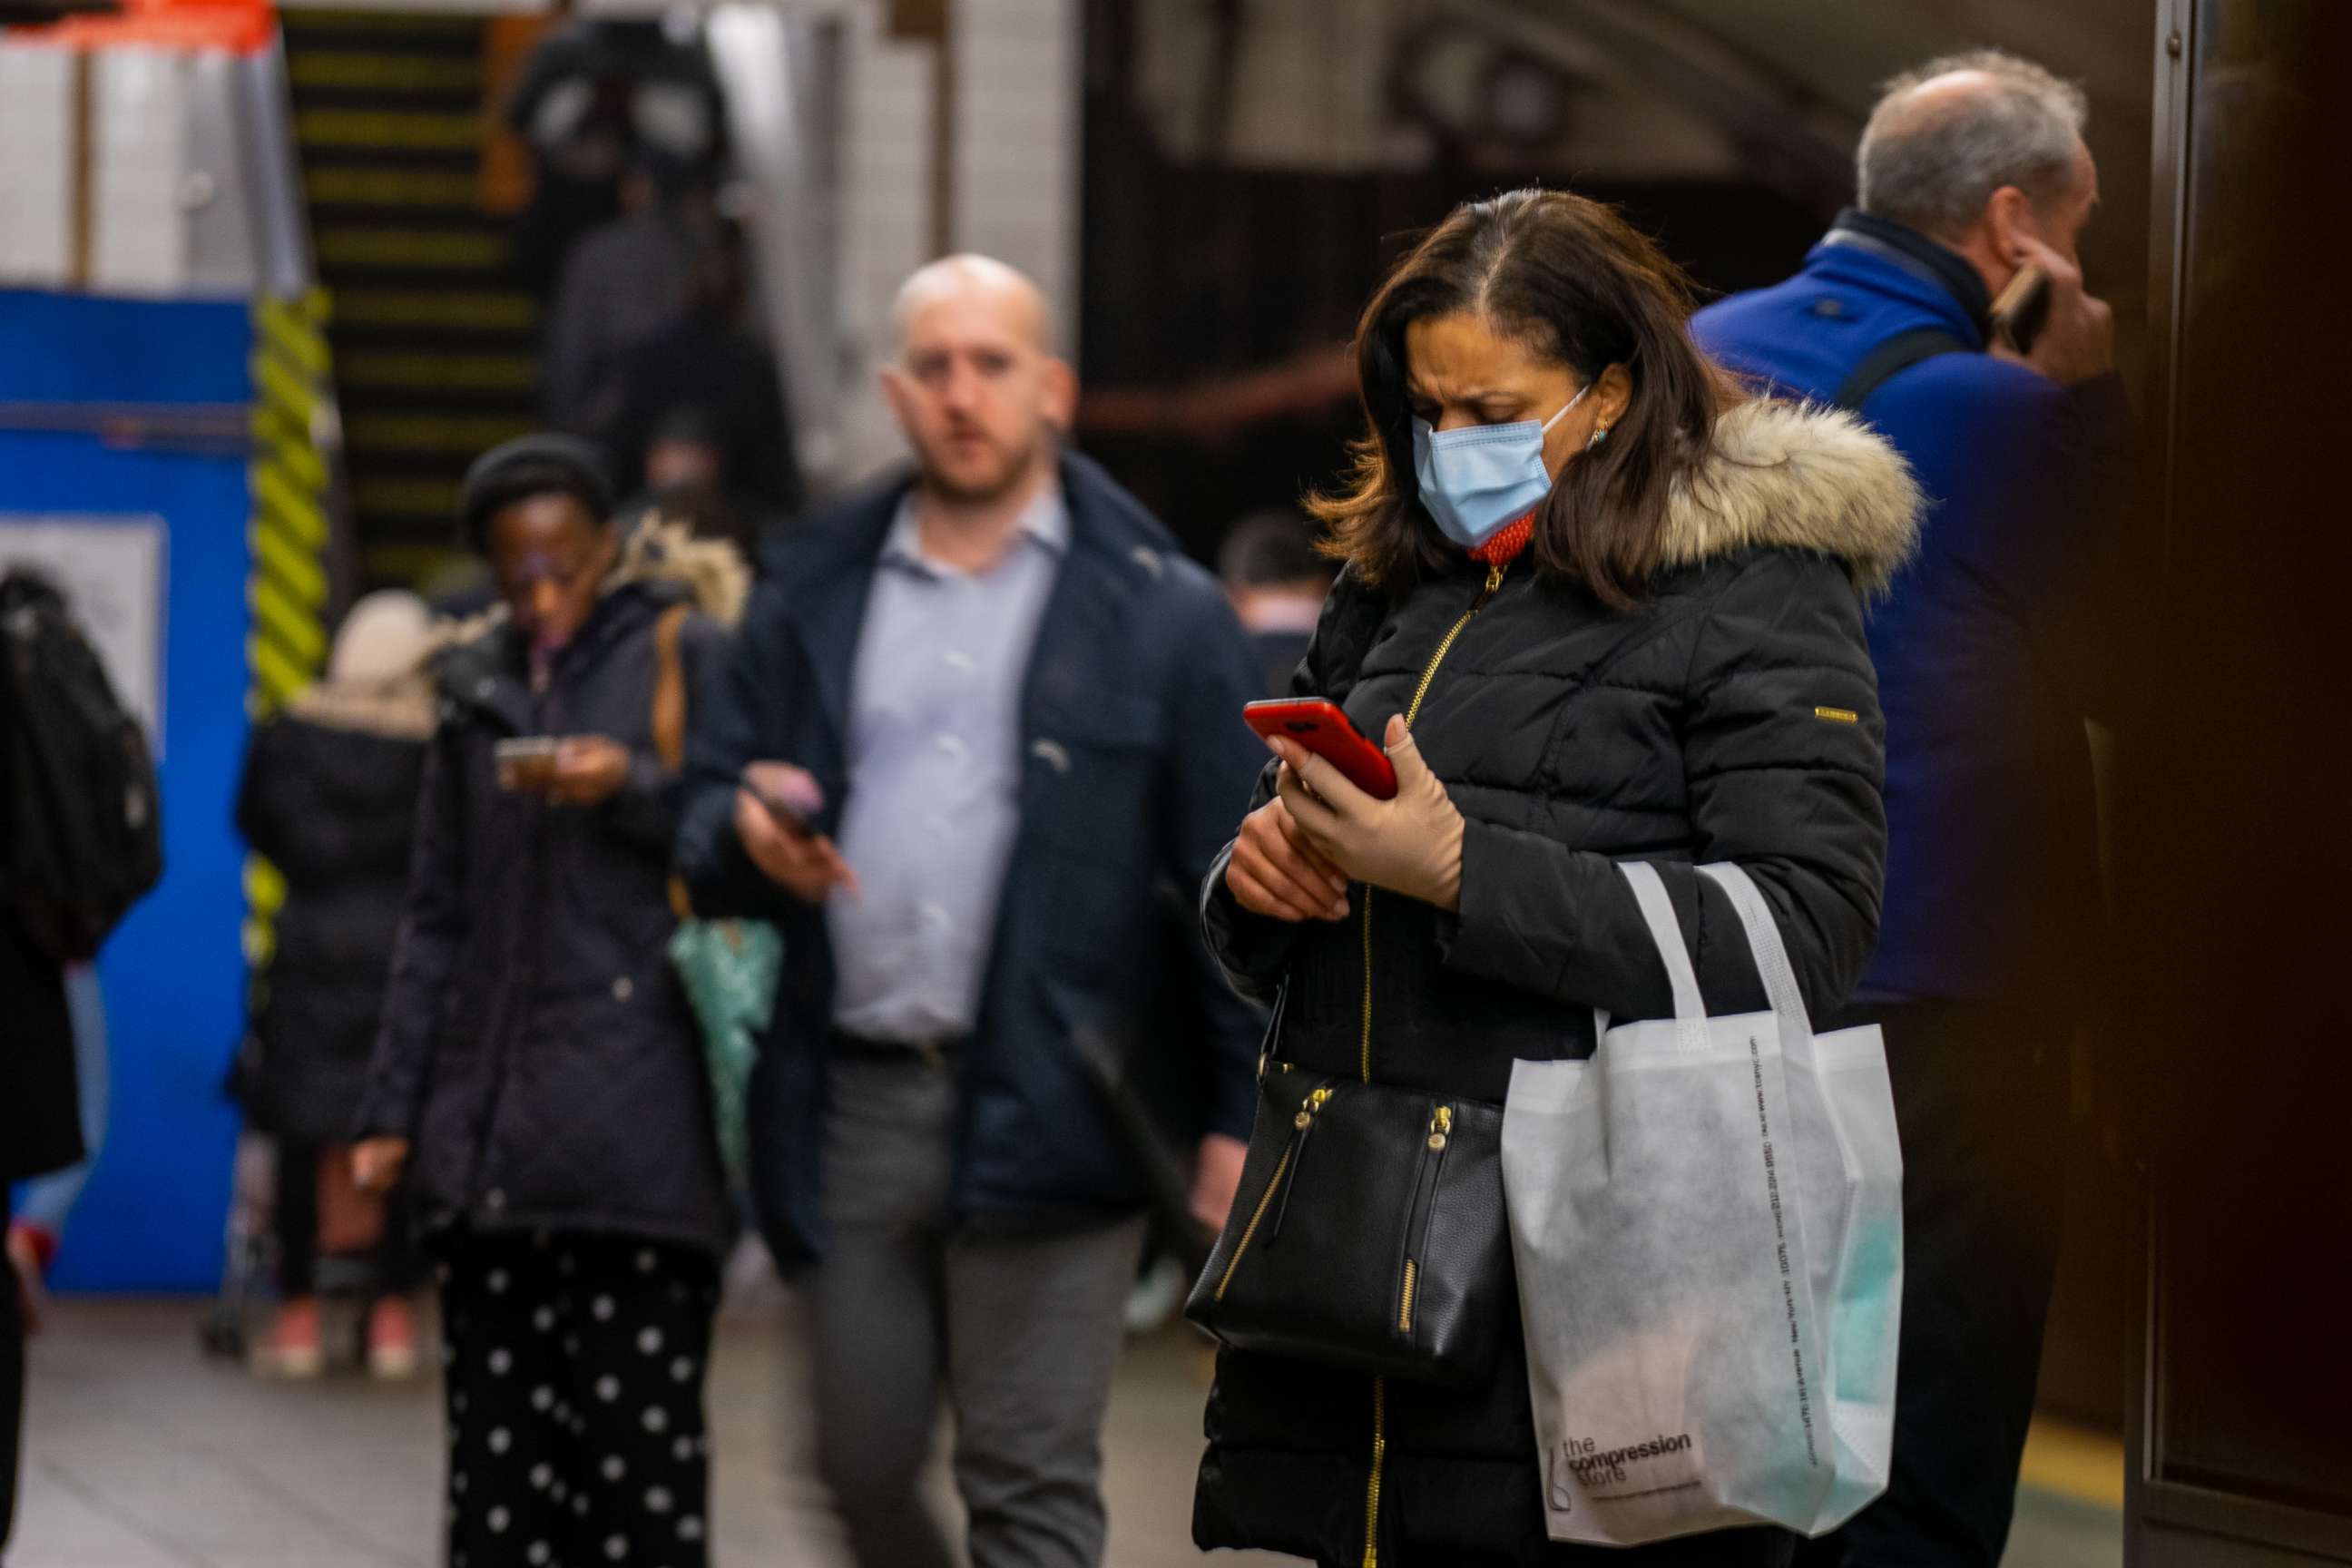 PHOTO: A traveler wears a medical mask at Grand Central station in the Manhattan borough of New York City, New York, U.S., March 5, 2020.